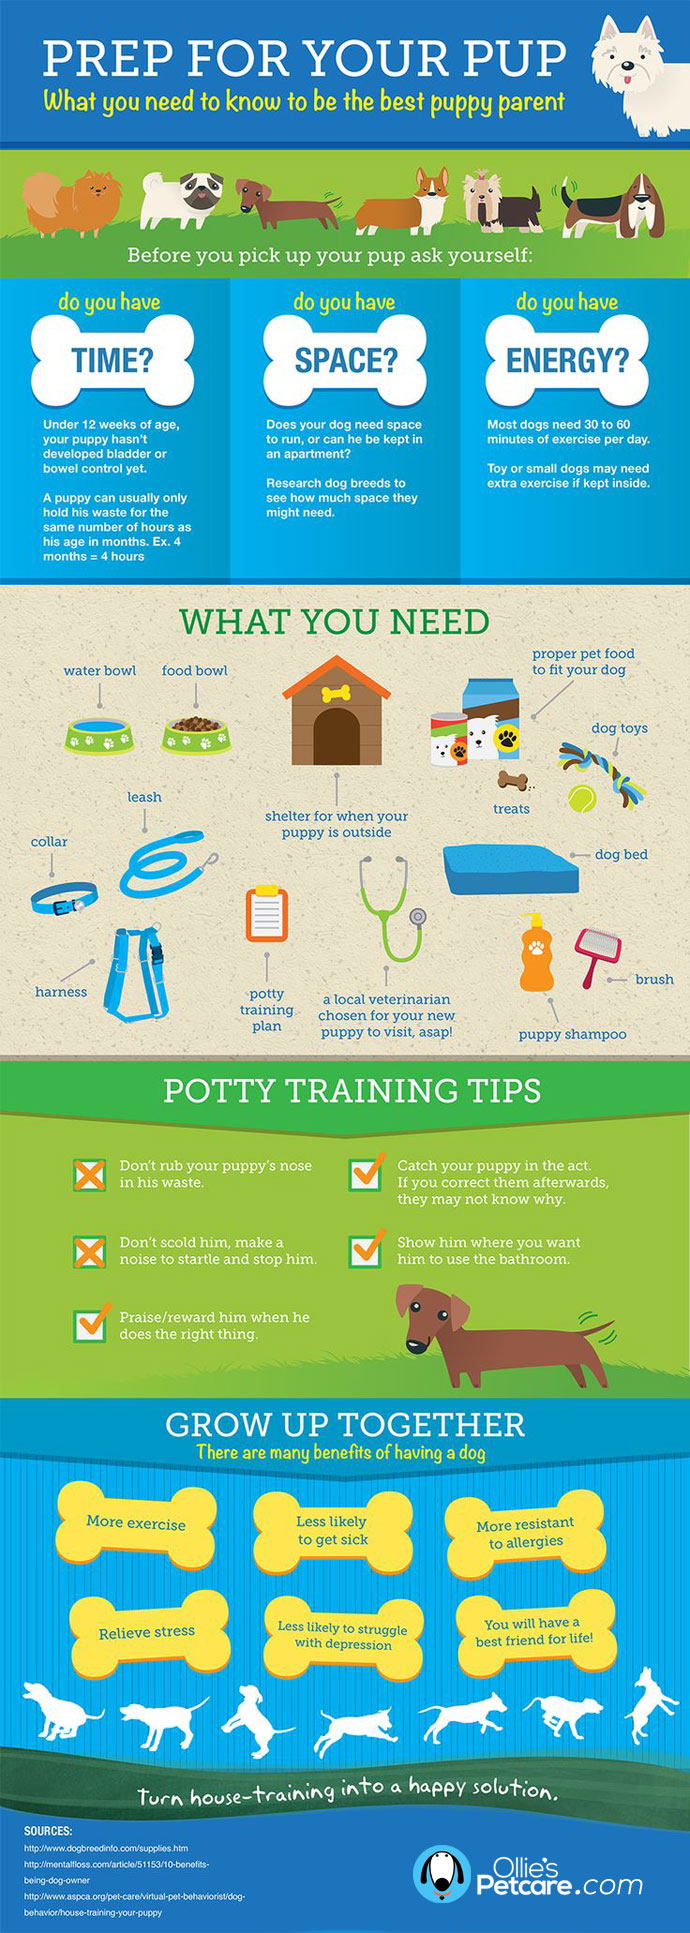 Prep For Your Pup - Tips to think about before getting a dog!